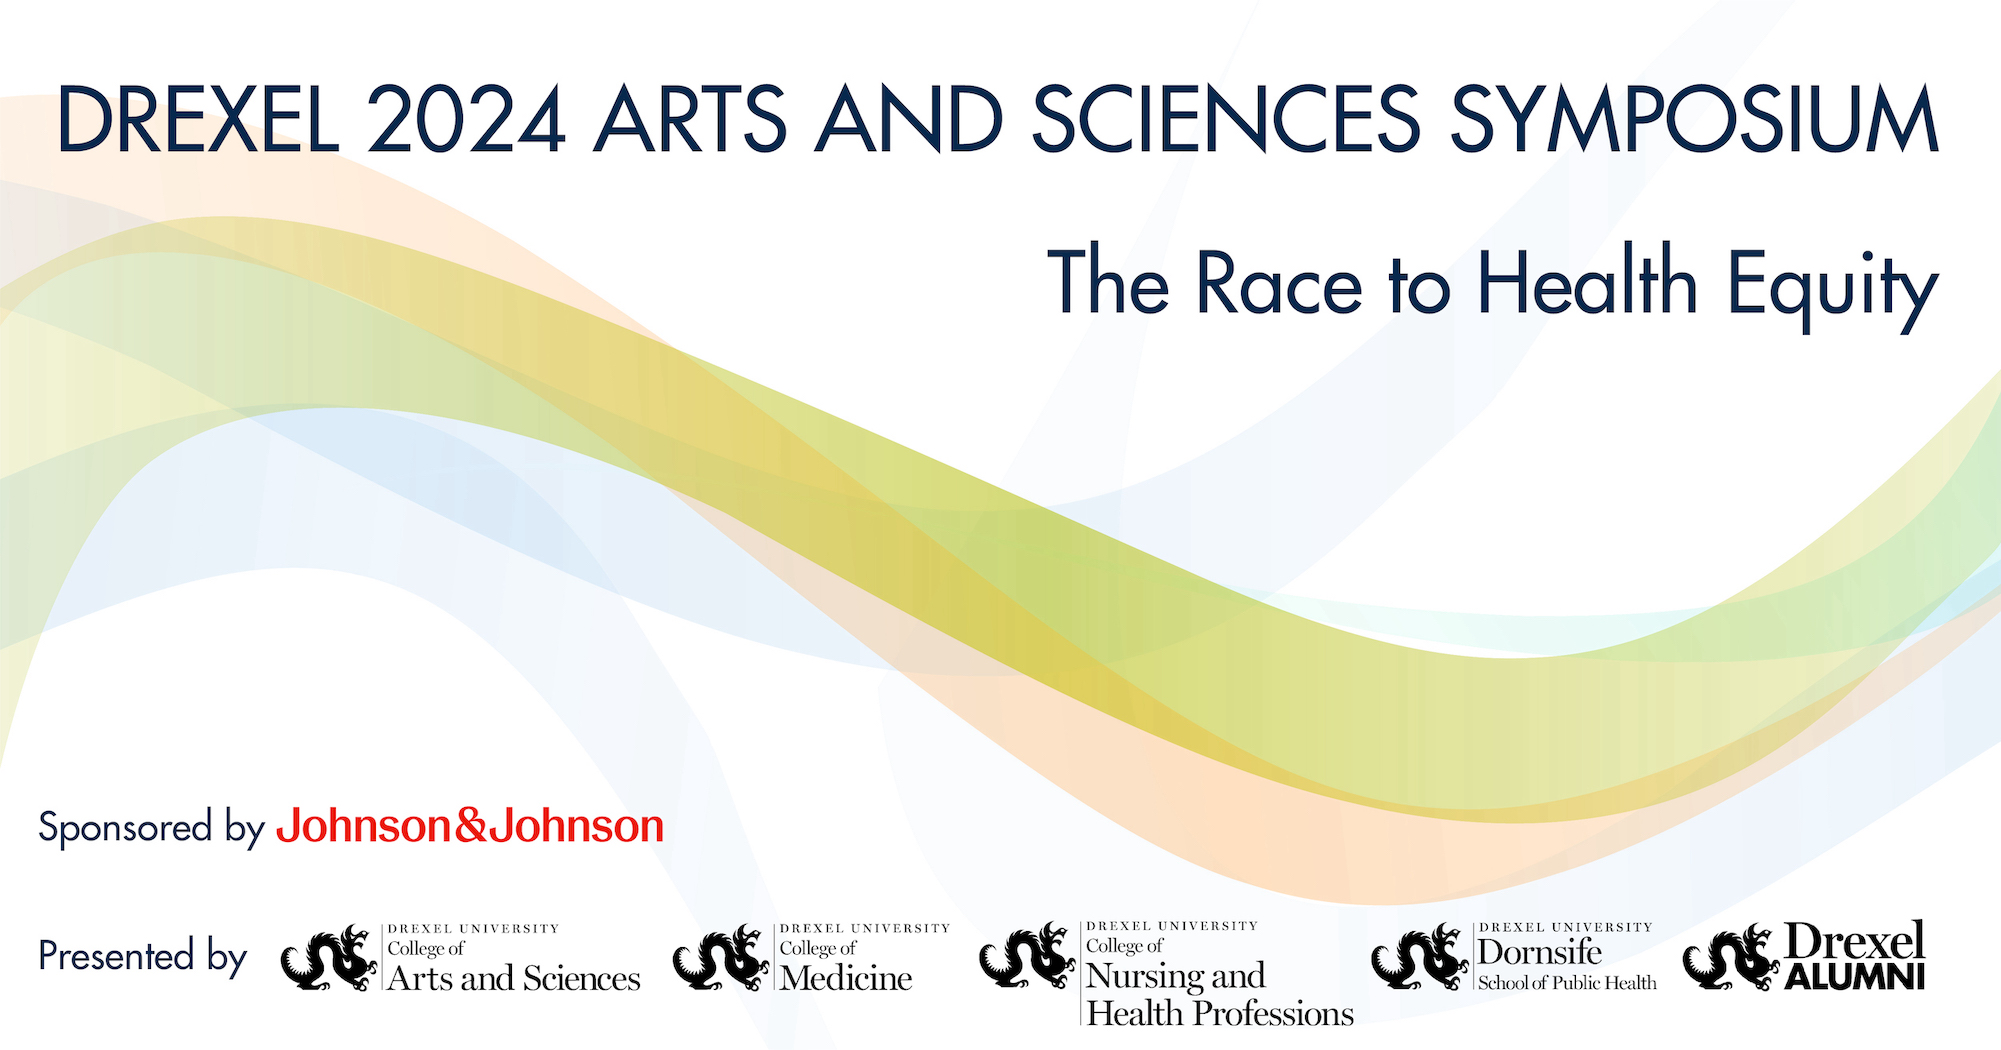 Arts and Sciences Symposium The Race to Health Equity